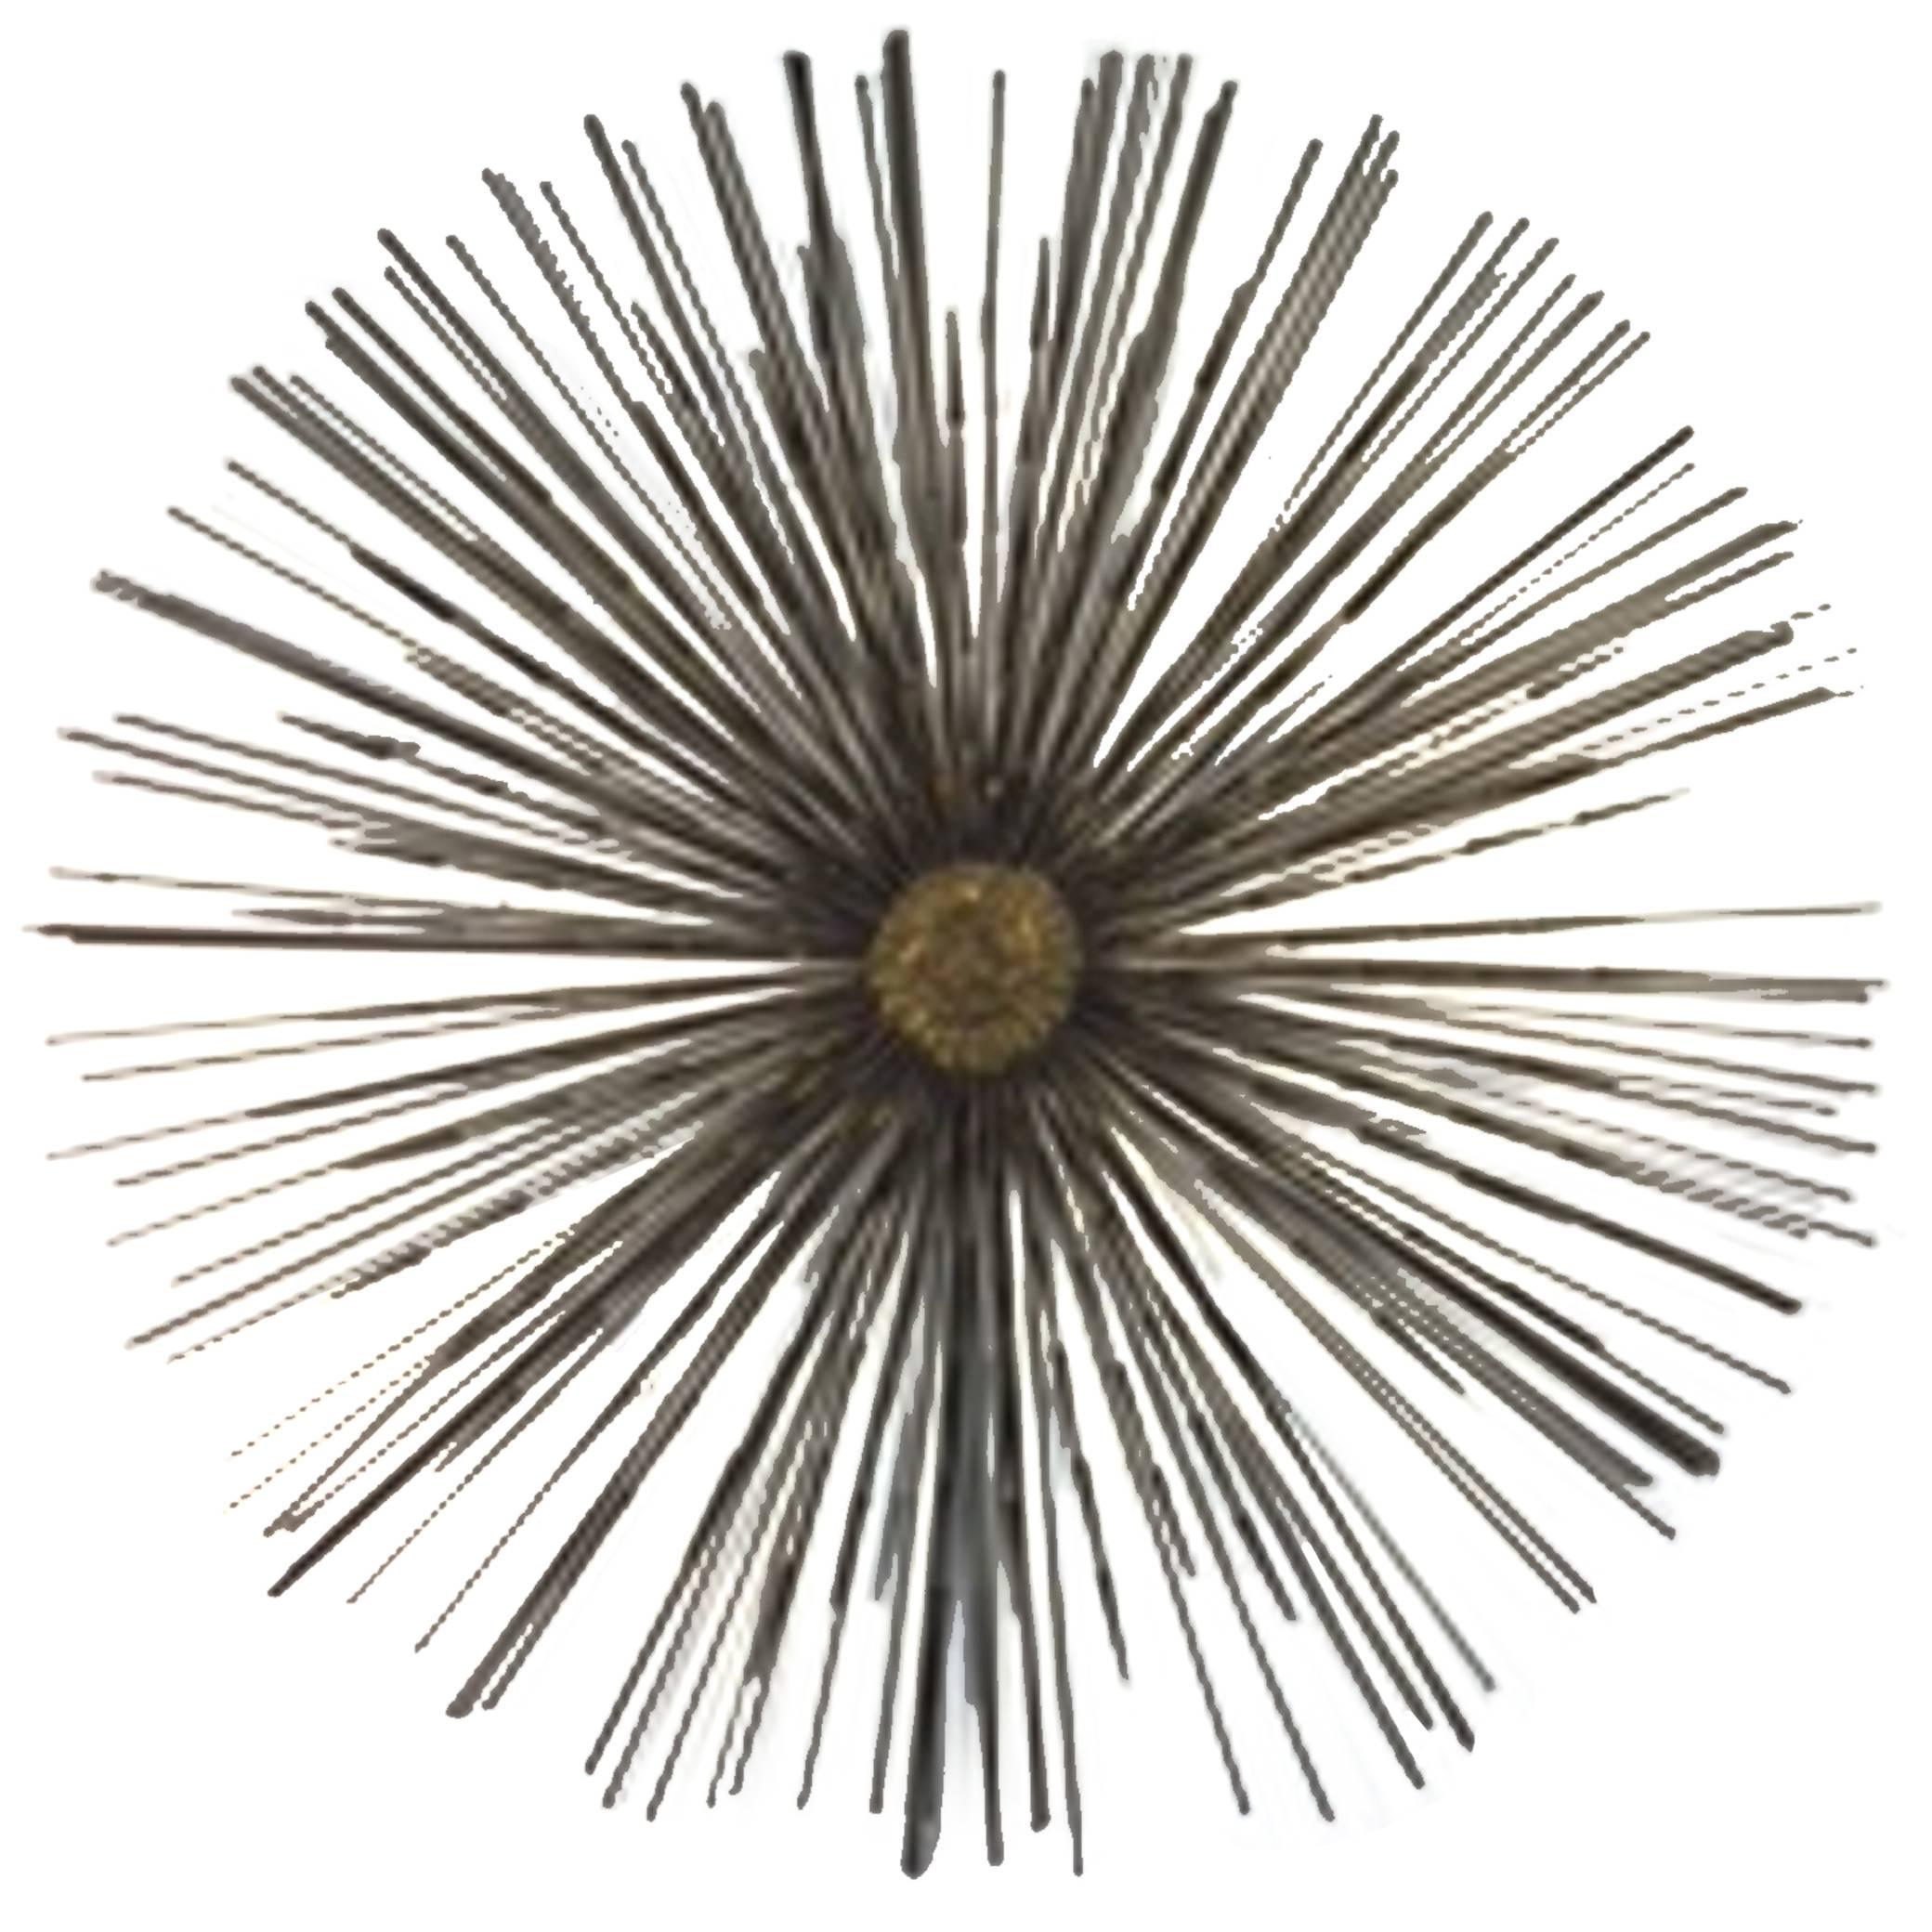 Exceptional Curtis Jere Starburst Wall-Mounted Dimensional Sculpture For Sale